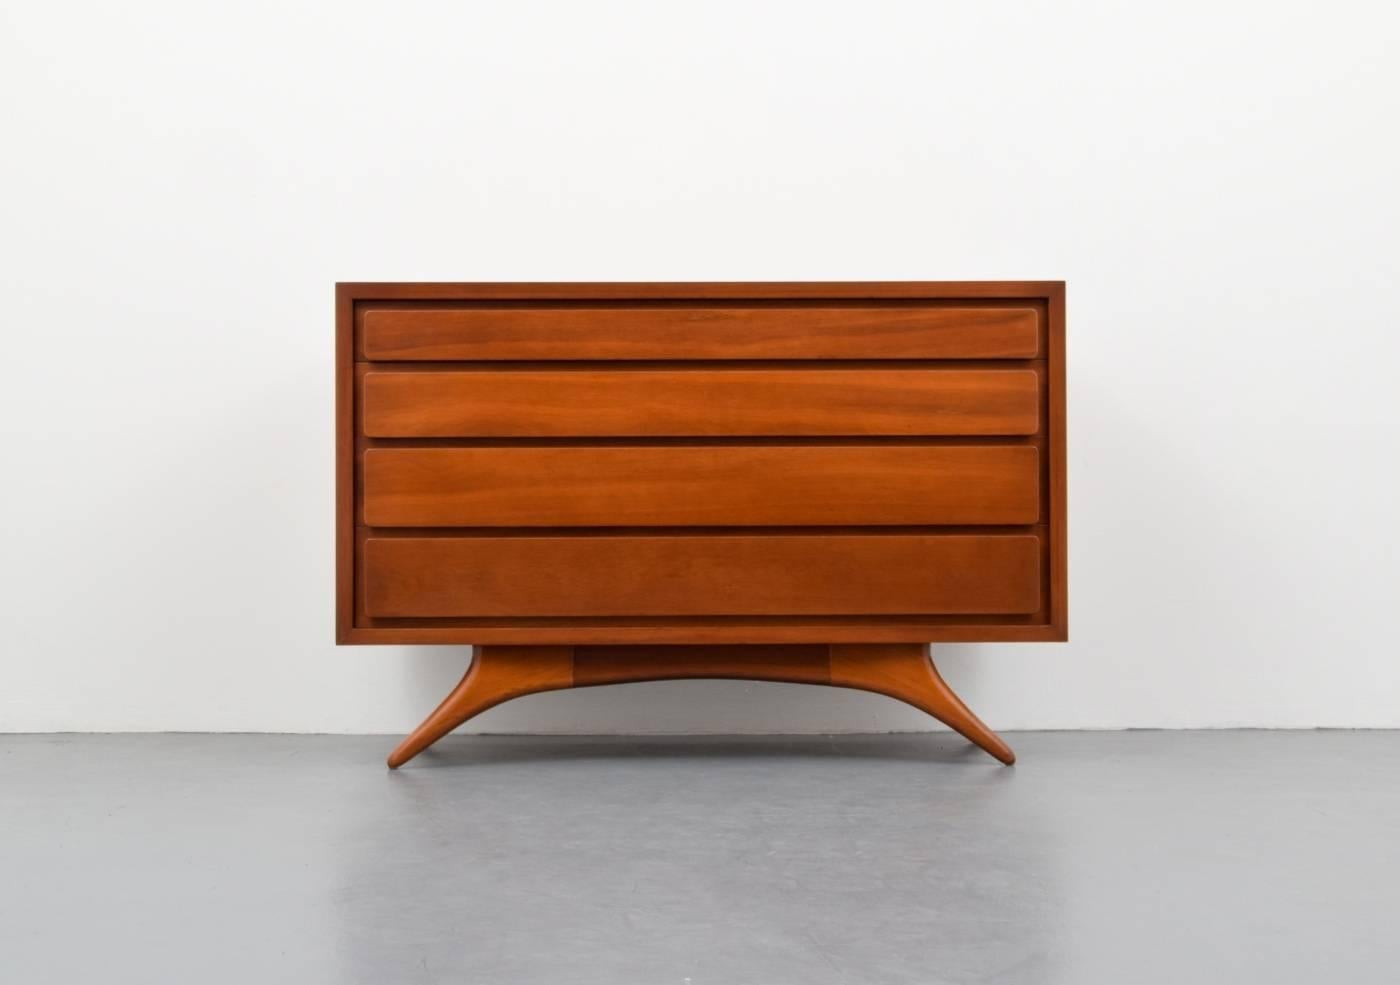 Rare and early cabinet/dresser with four floating drawers on sculpted legs by Vladimir Kagan. Chest is similar to smaller models of #3401 and #3501. Cabinet is from a single-owner collection of early Vladimir Kagan furniture (please see the other